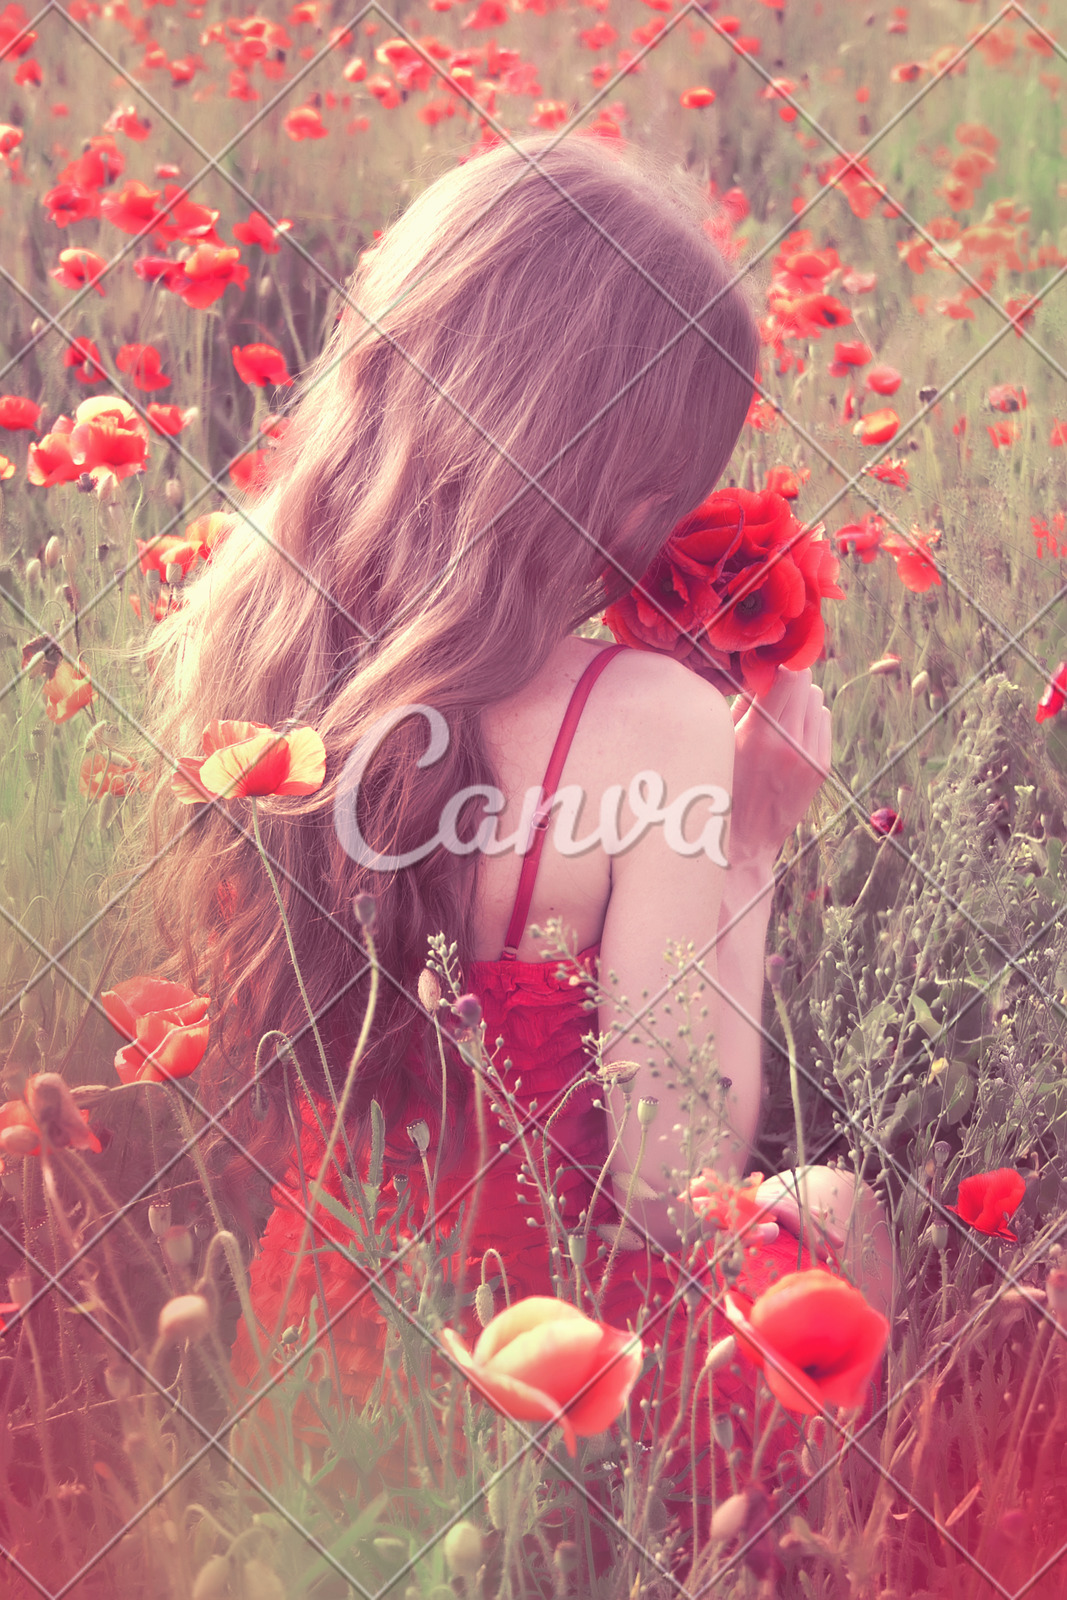 Back View Of A Young Woman With Long Blonde Hair Photos By Canva